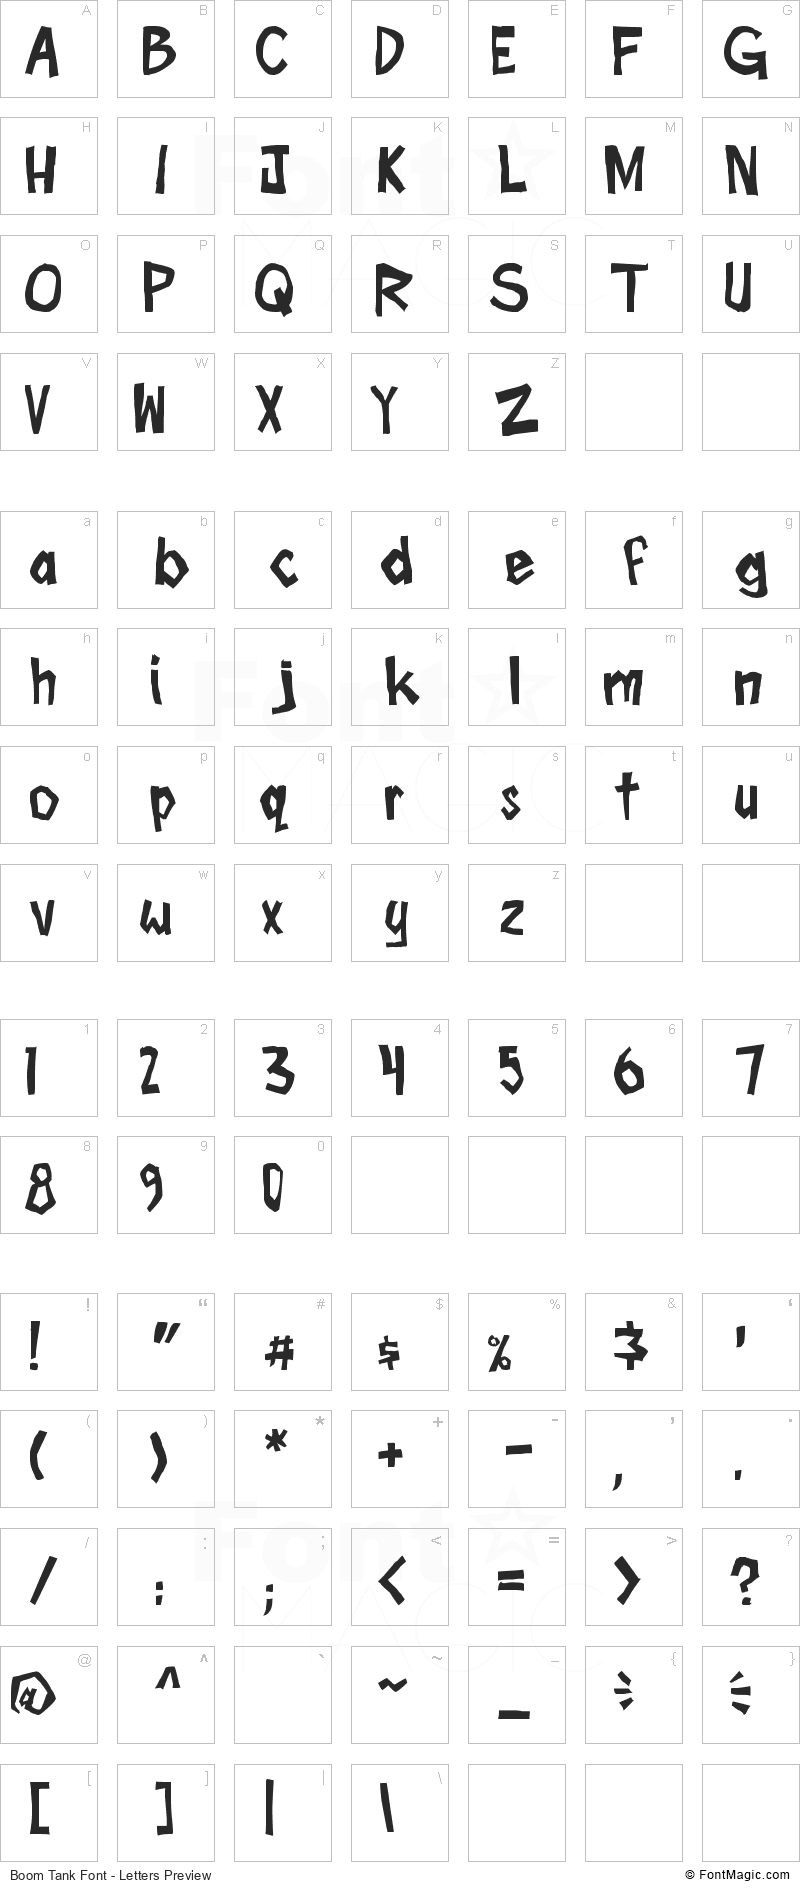 Boom Tank Font - All Latters Preview Chart